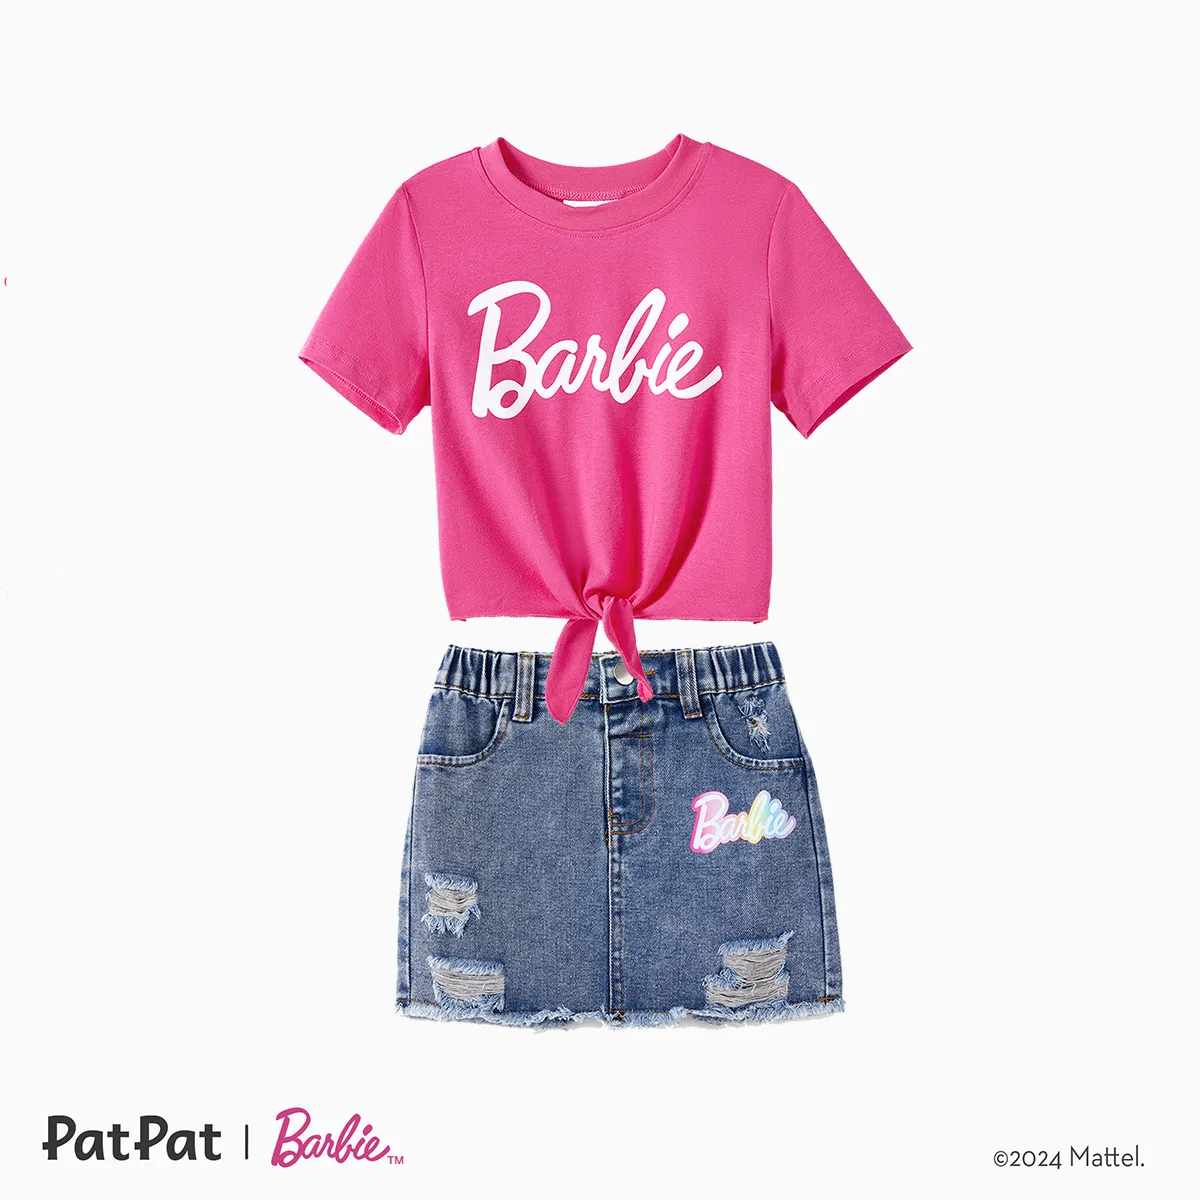 Barbie Mommy and Me Colorful Classic Letter Logo Print Denim Skirt Blue big image 1